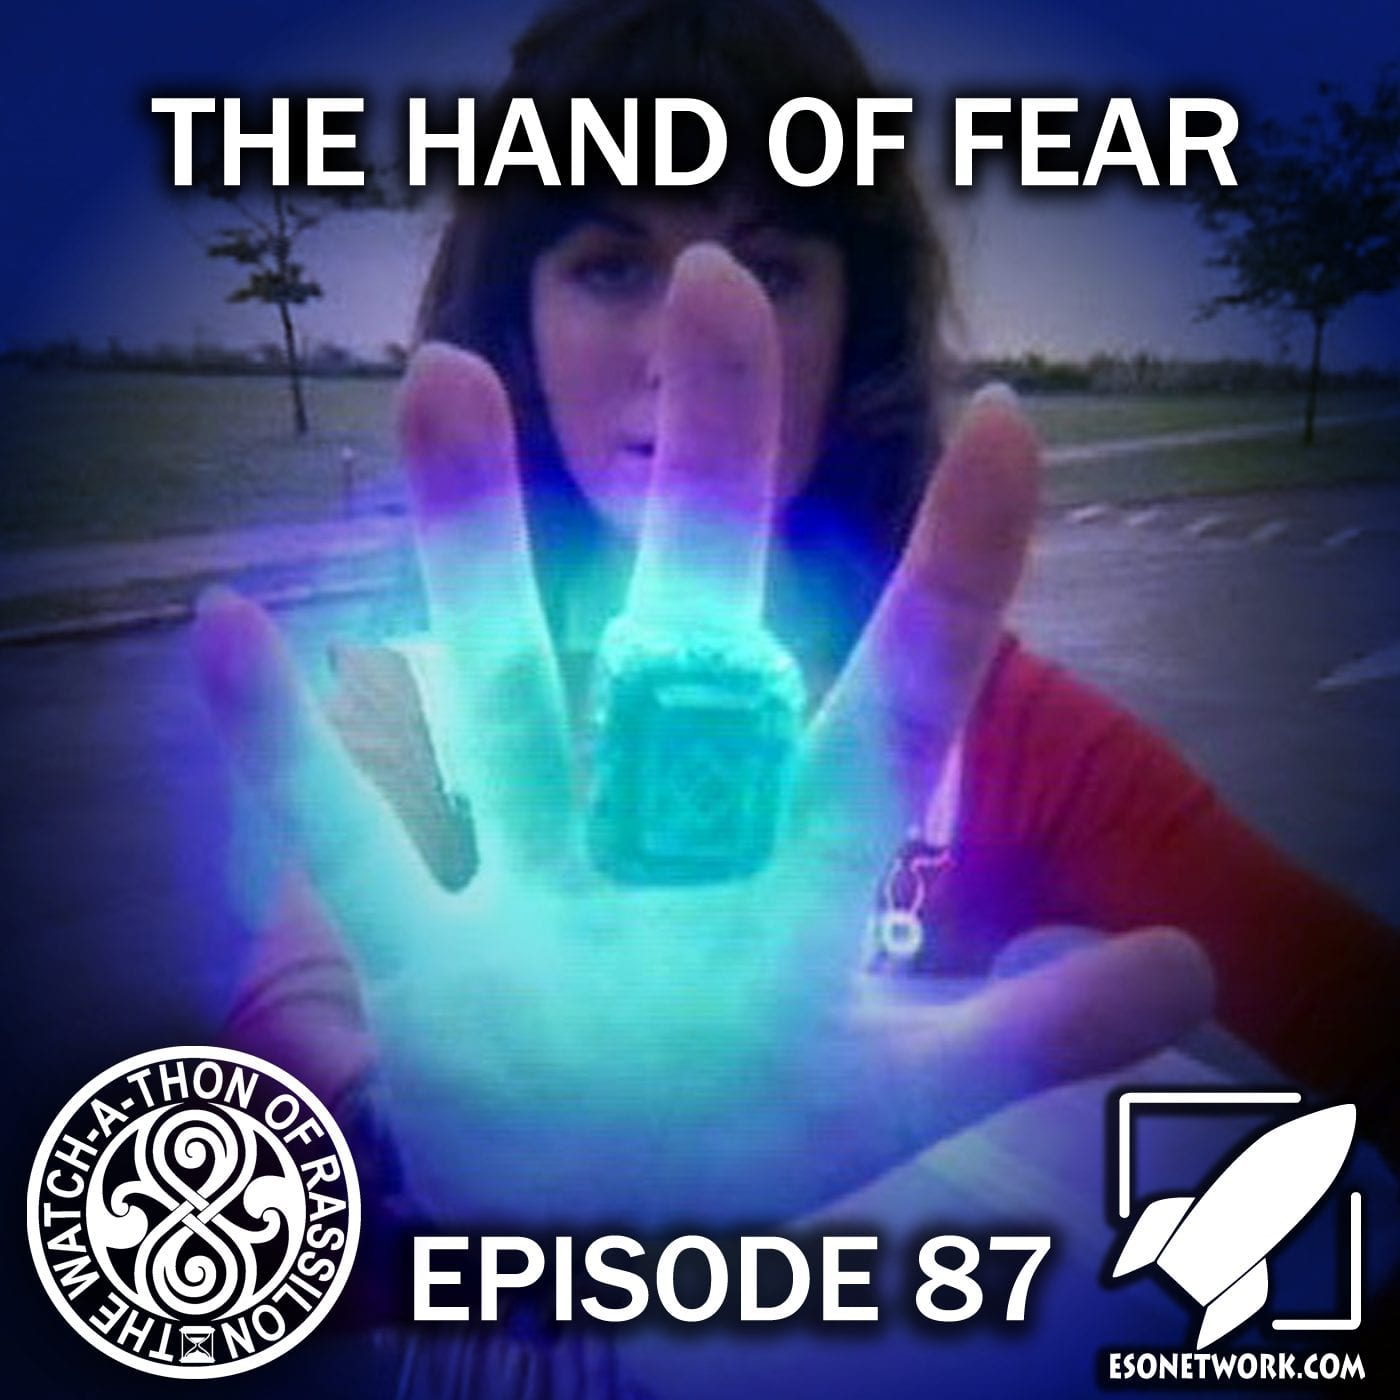 The Watch-A-Thon of Rassilon: Episode 87: The Hand of Fear